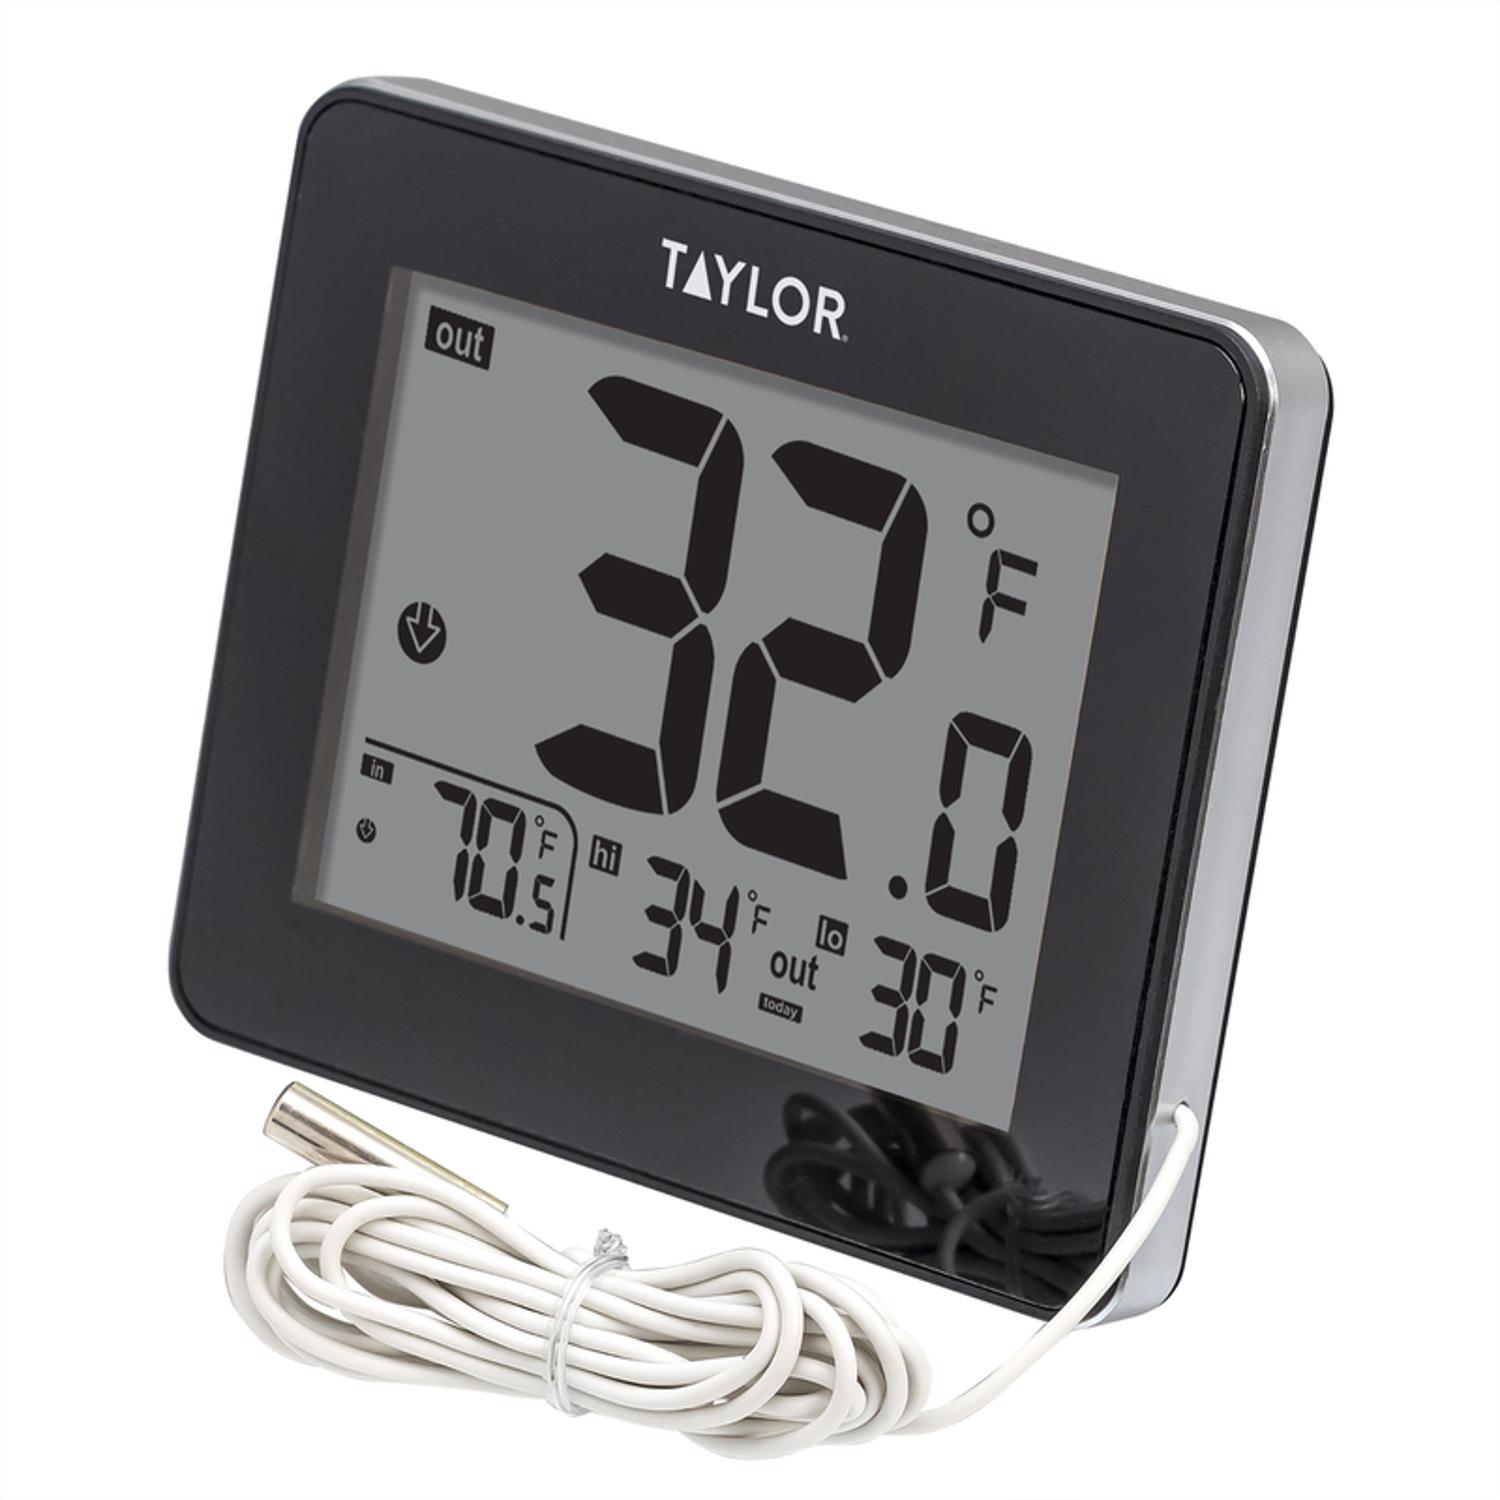 Taylor Cardinal Outdoor Window Thermometer, 8 in.